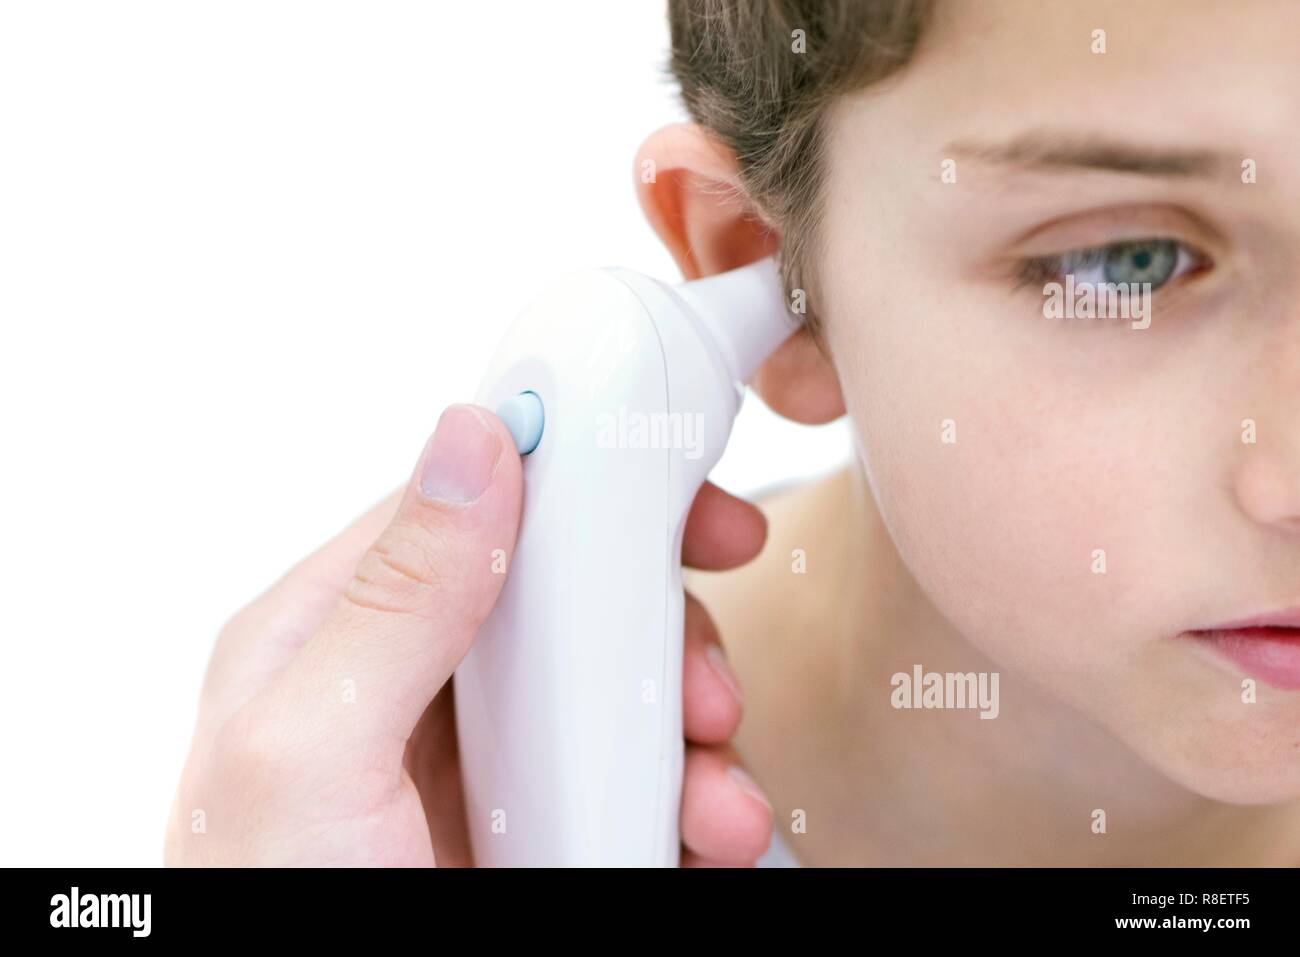 Boy having his temperature taken with a digital thermometer. Stock Photo